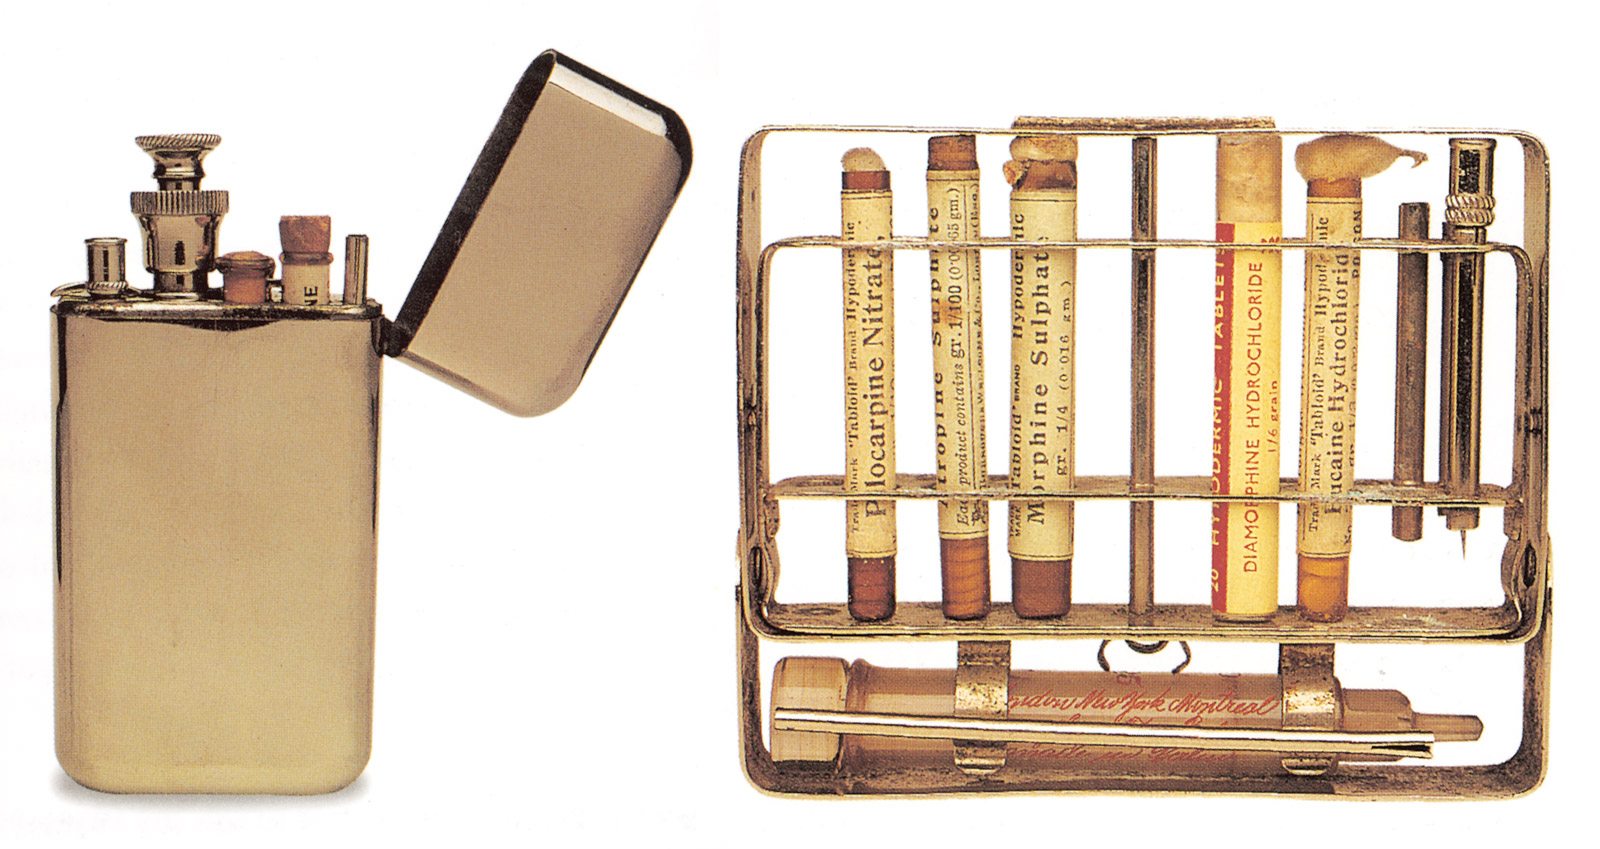 A photograph of an early twentieth-century morphine kit disguised as a cigarette lighter.